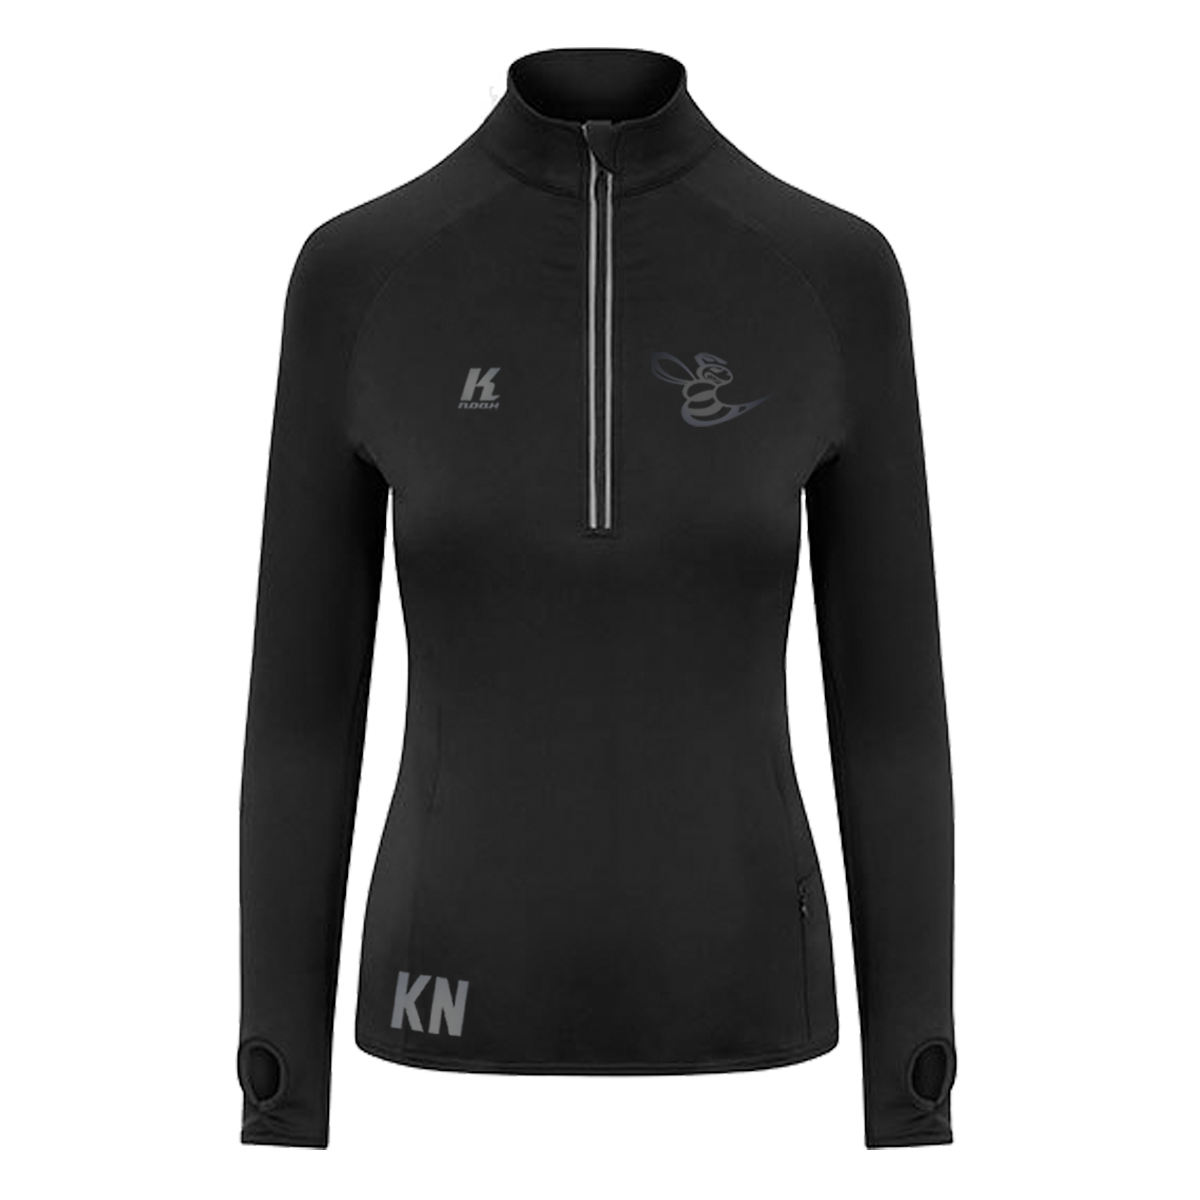 Hornets "Blackline" Womens Cool Flex 1/2 Zip Top with Initials/Playernumber